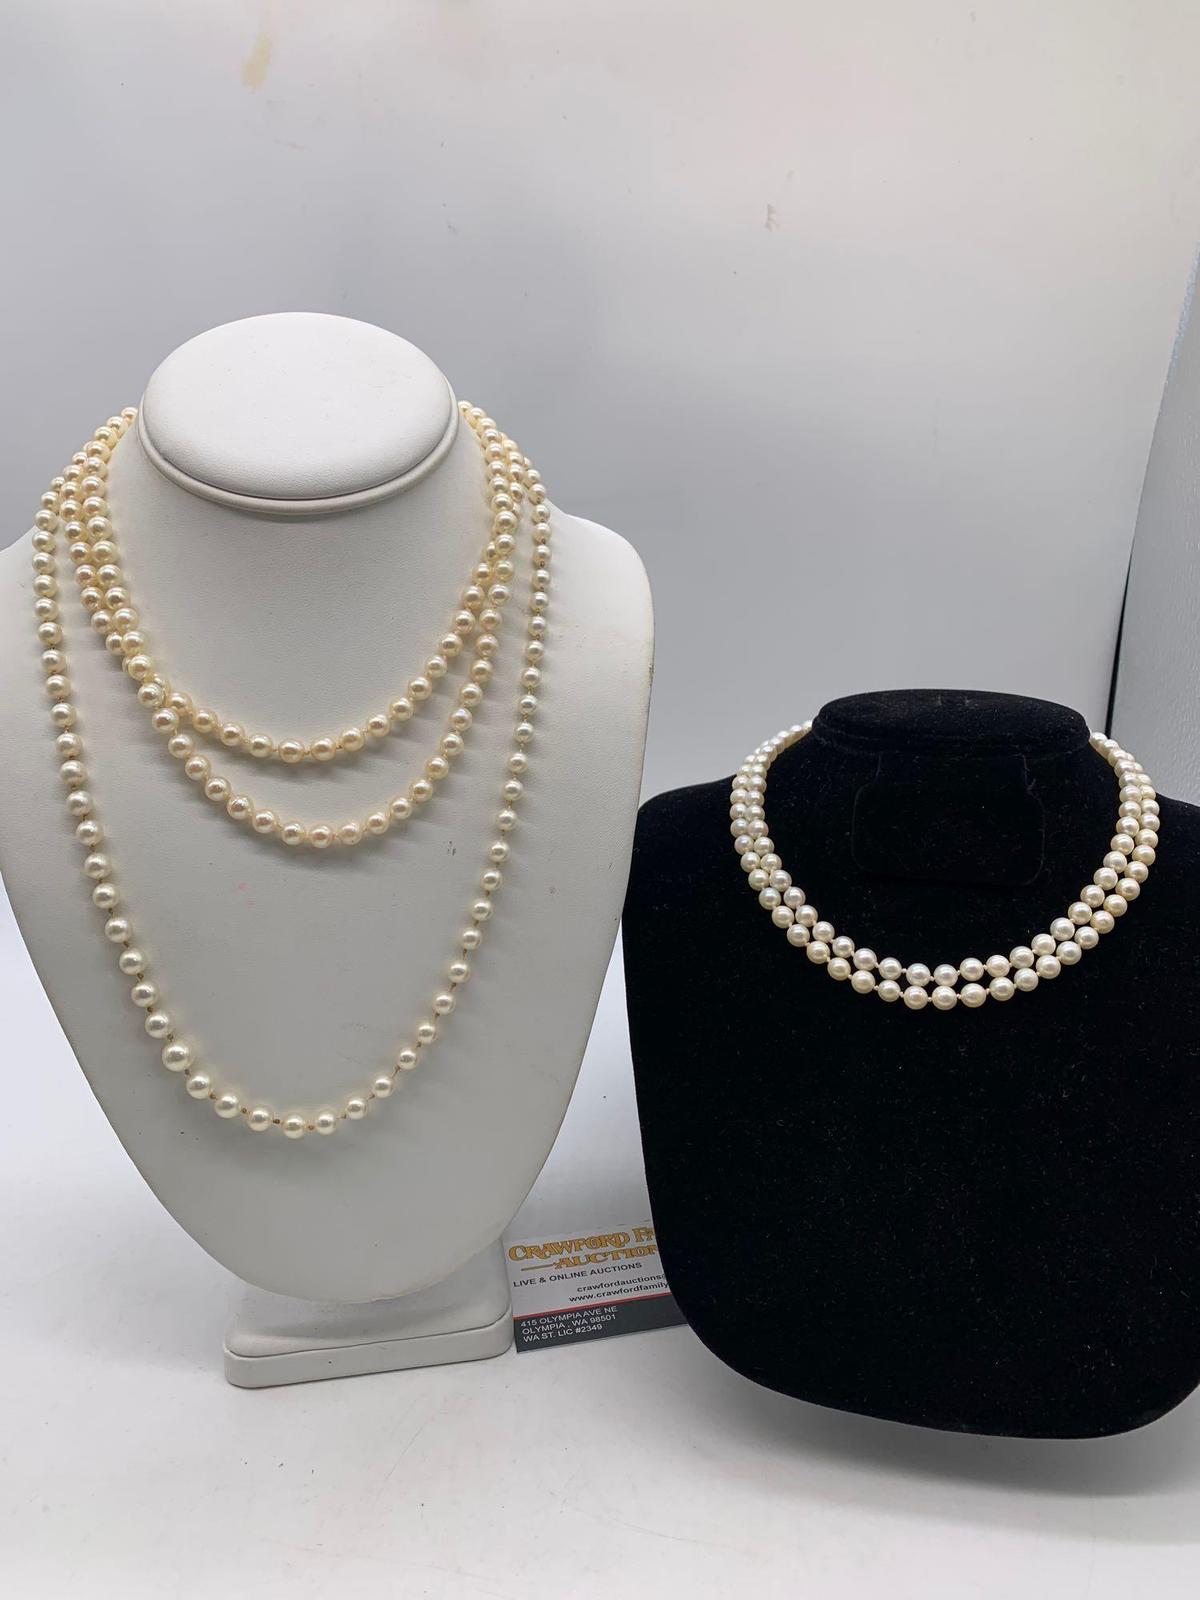 3x Real pearl necklaces with 14K gold clasp, 2 x double strand 16", 1 x single strand 23"